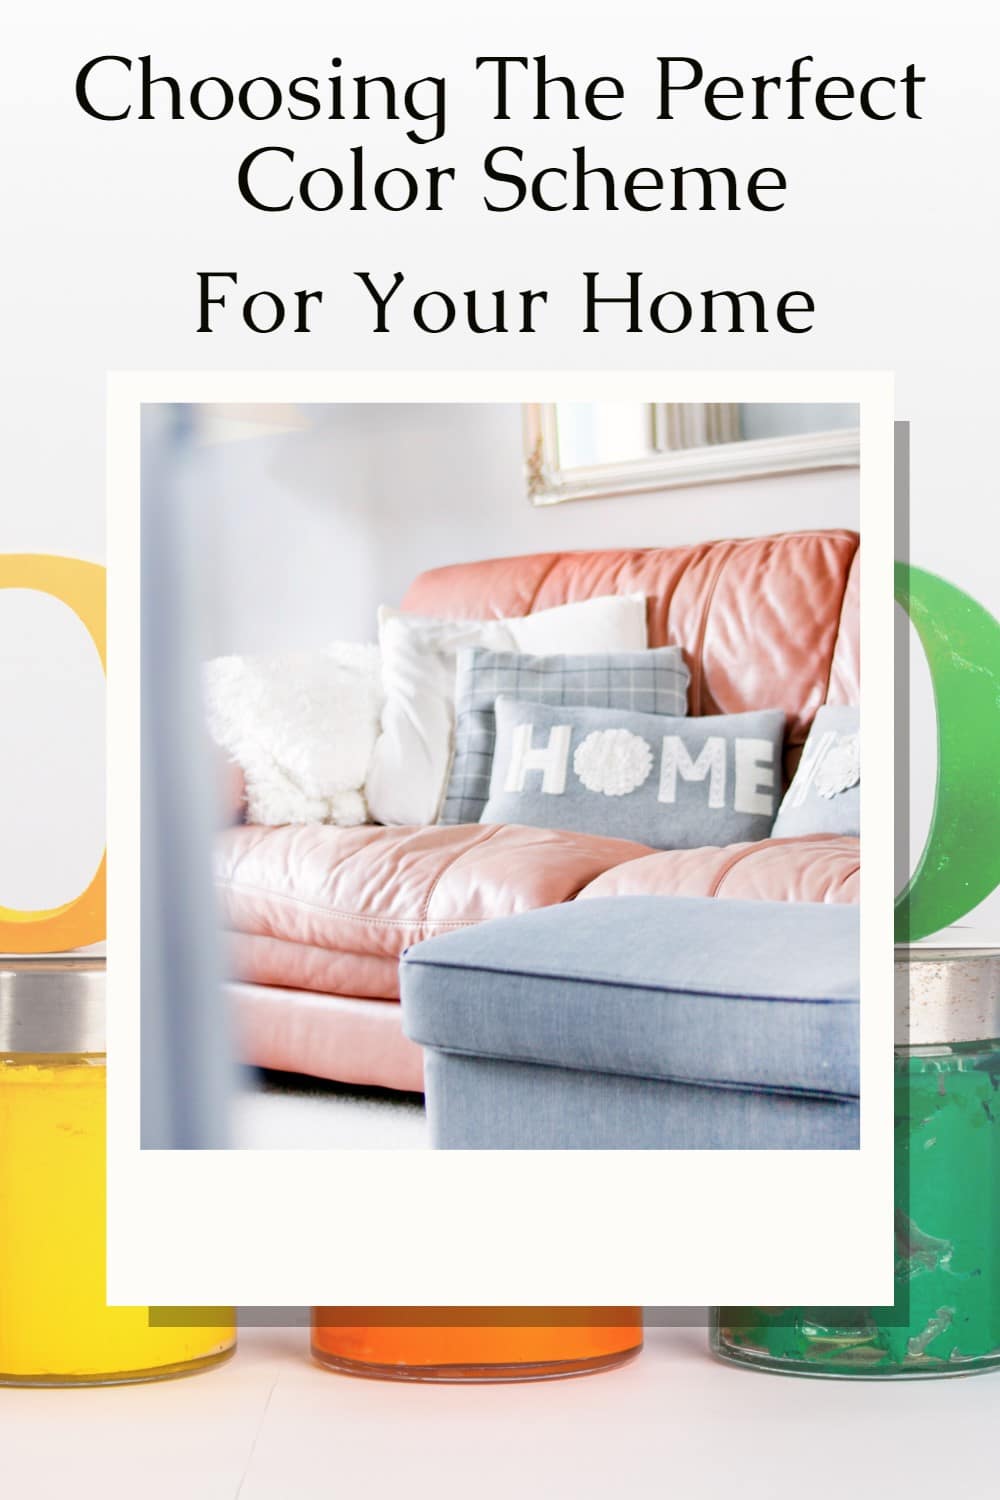 Does choosing a color scheme for your home decor make you nervous? Tips for decorating your home and choosing the correct paint and more. via @repurposedlife